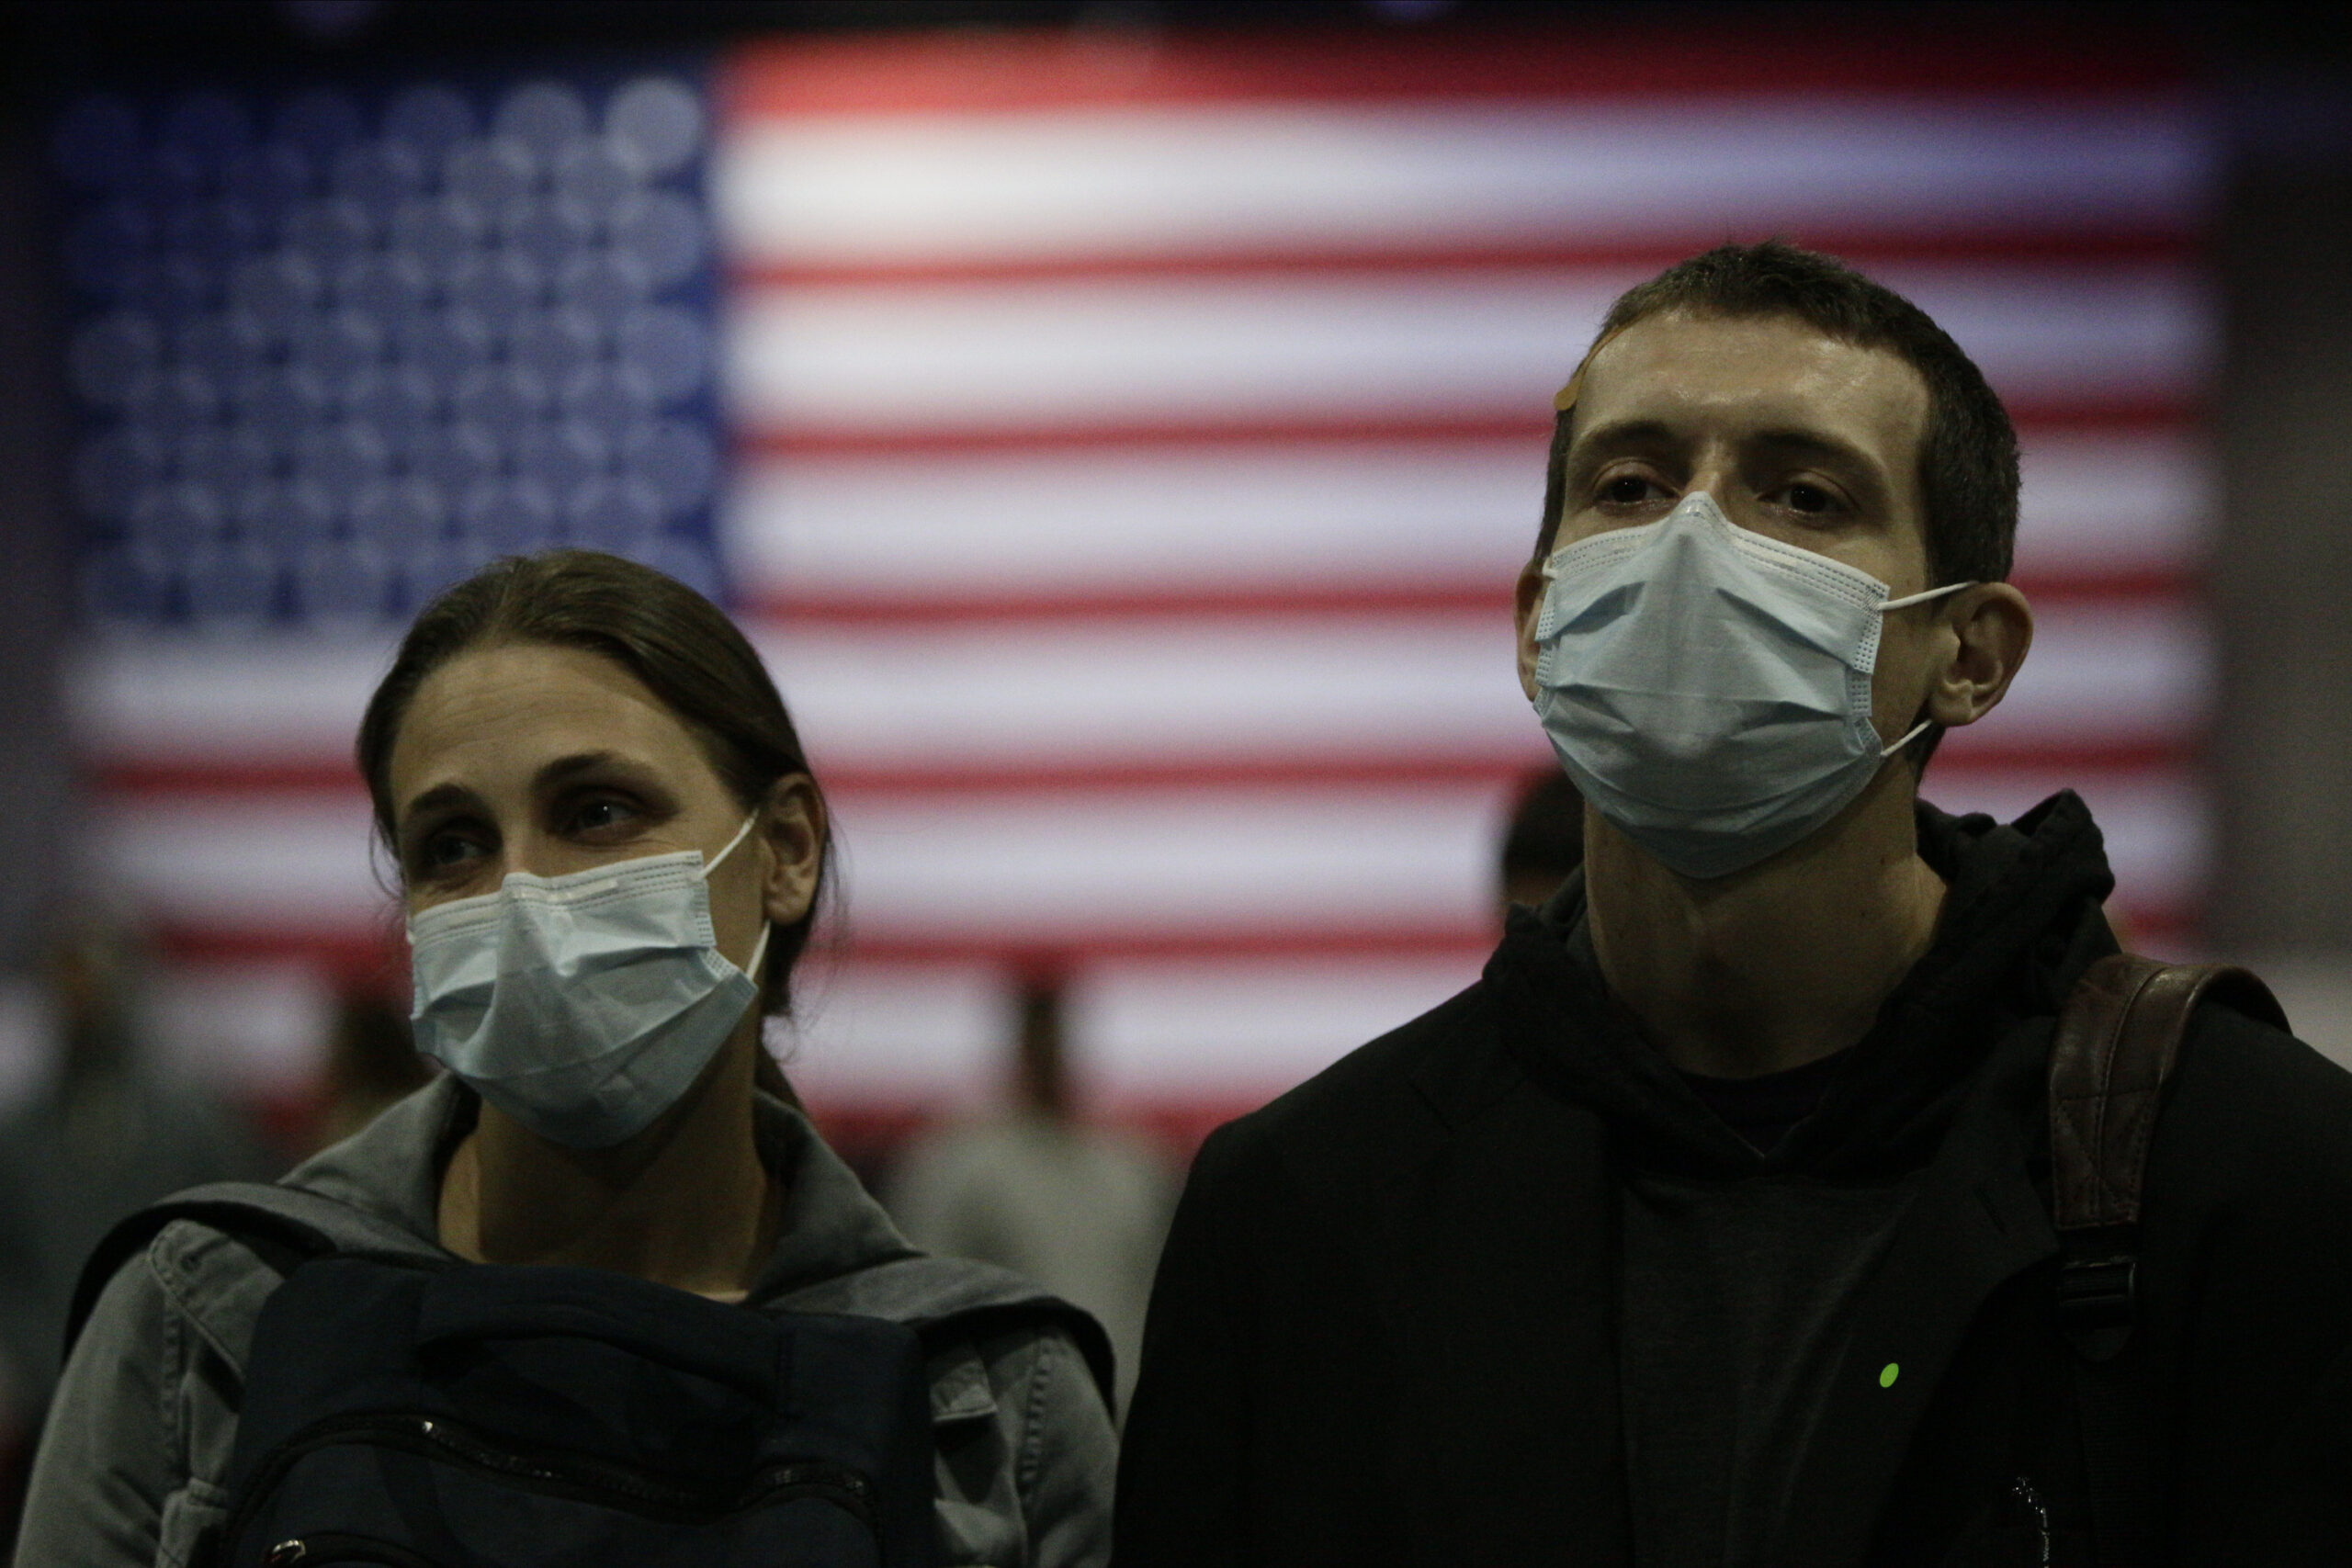 Political rally attendees wearing face masks